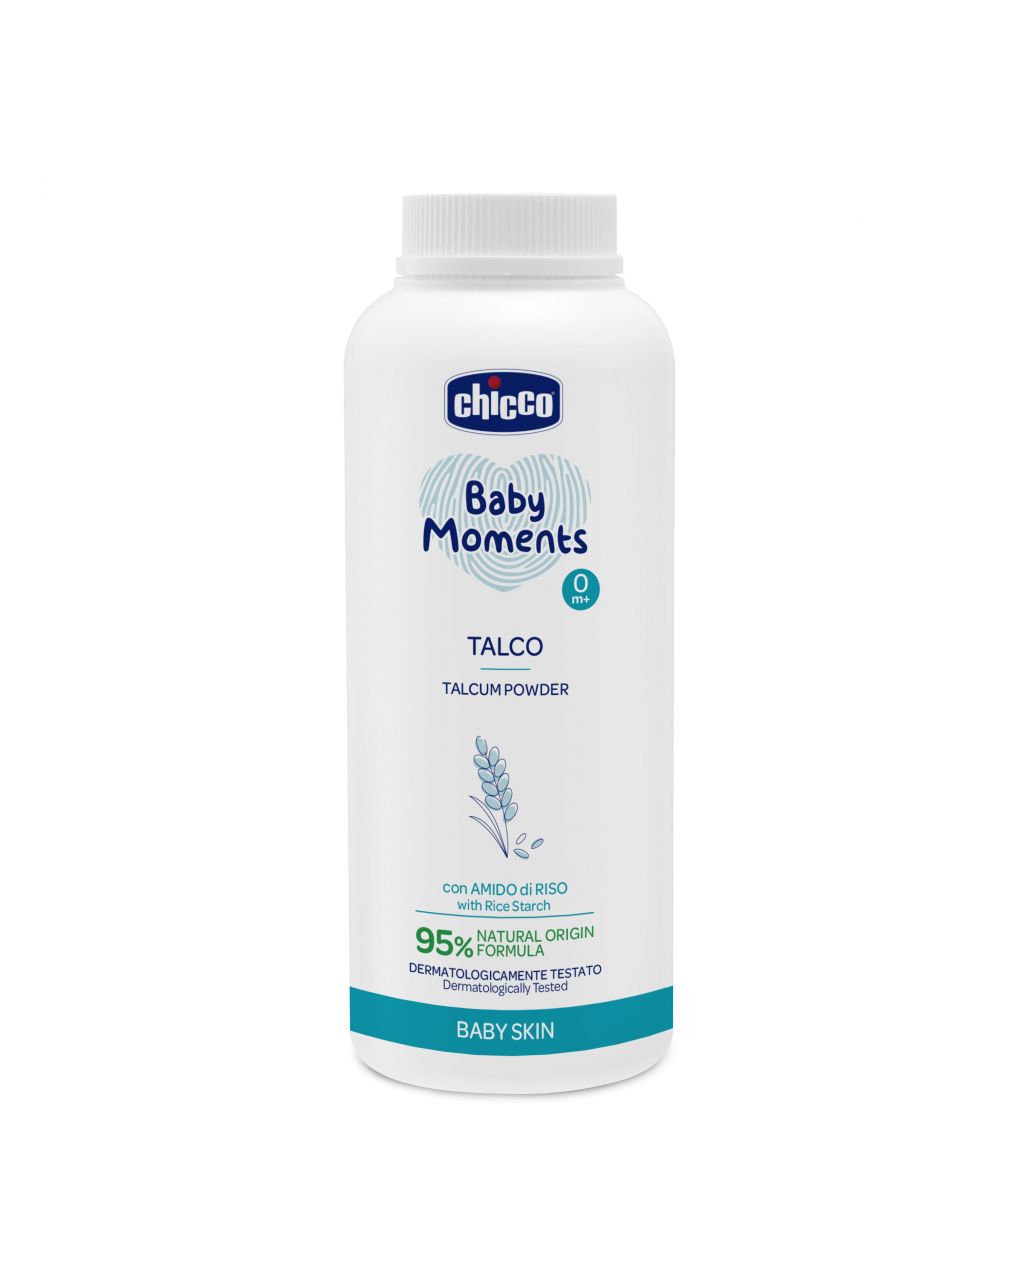 Talco baby moments chicco baby skin - Chicco